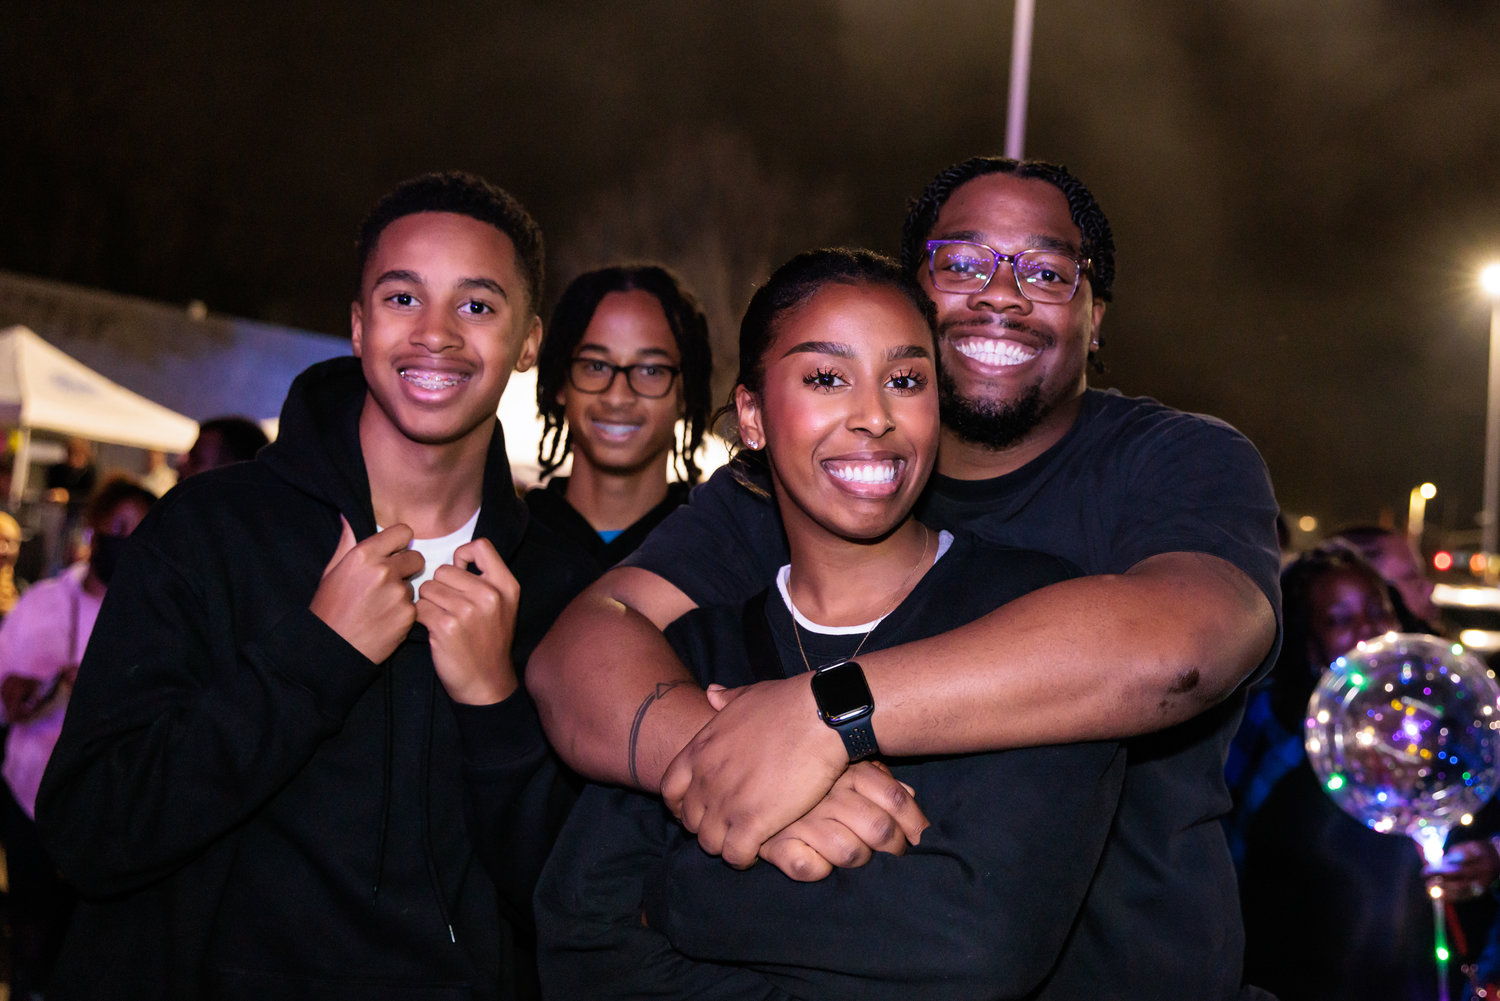 From left, Christopher Wooten, Michael Wooten, Jasmine Wooten, and Reginald Pulley celebrate at “Night Circus.”